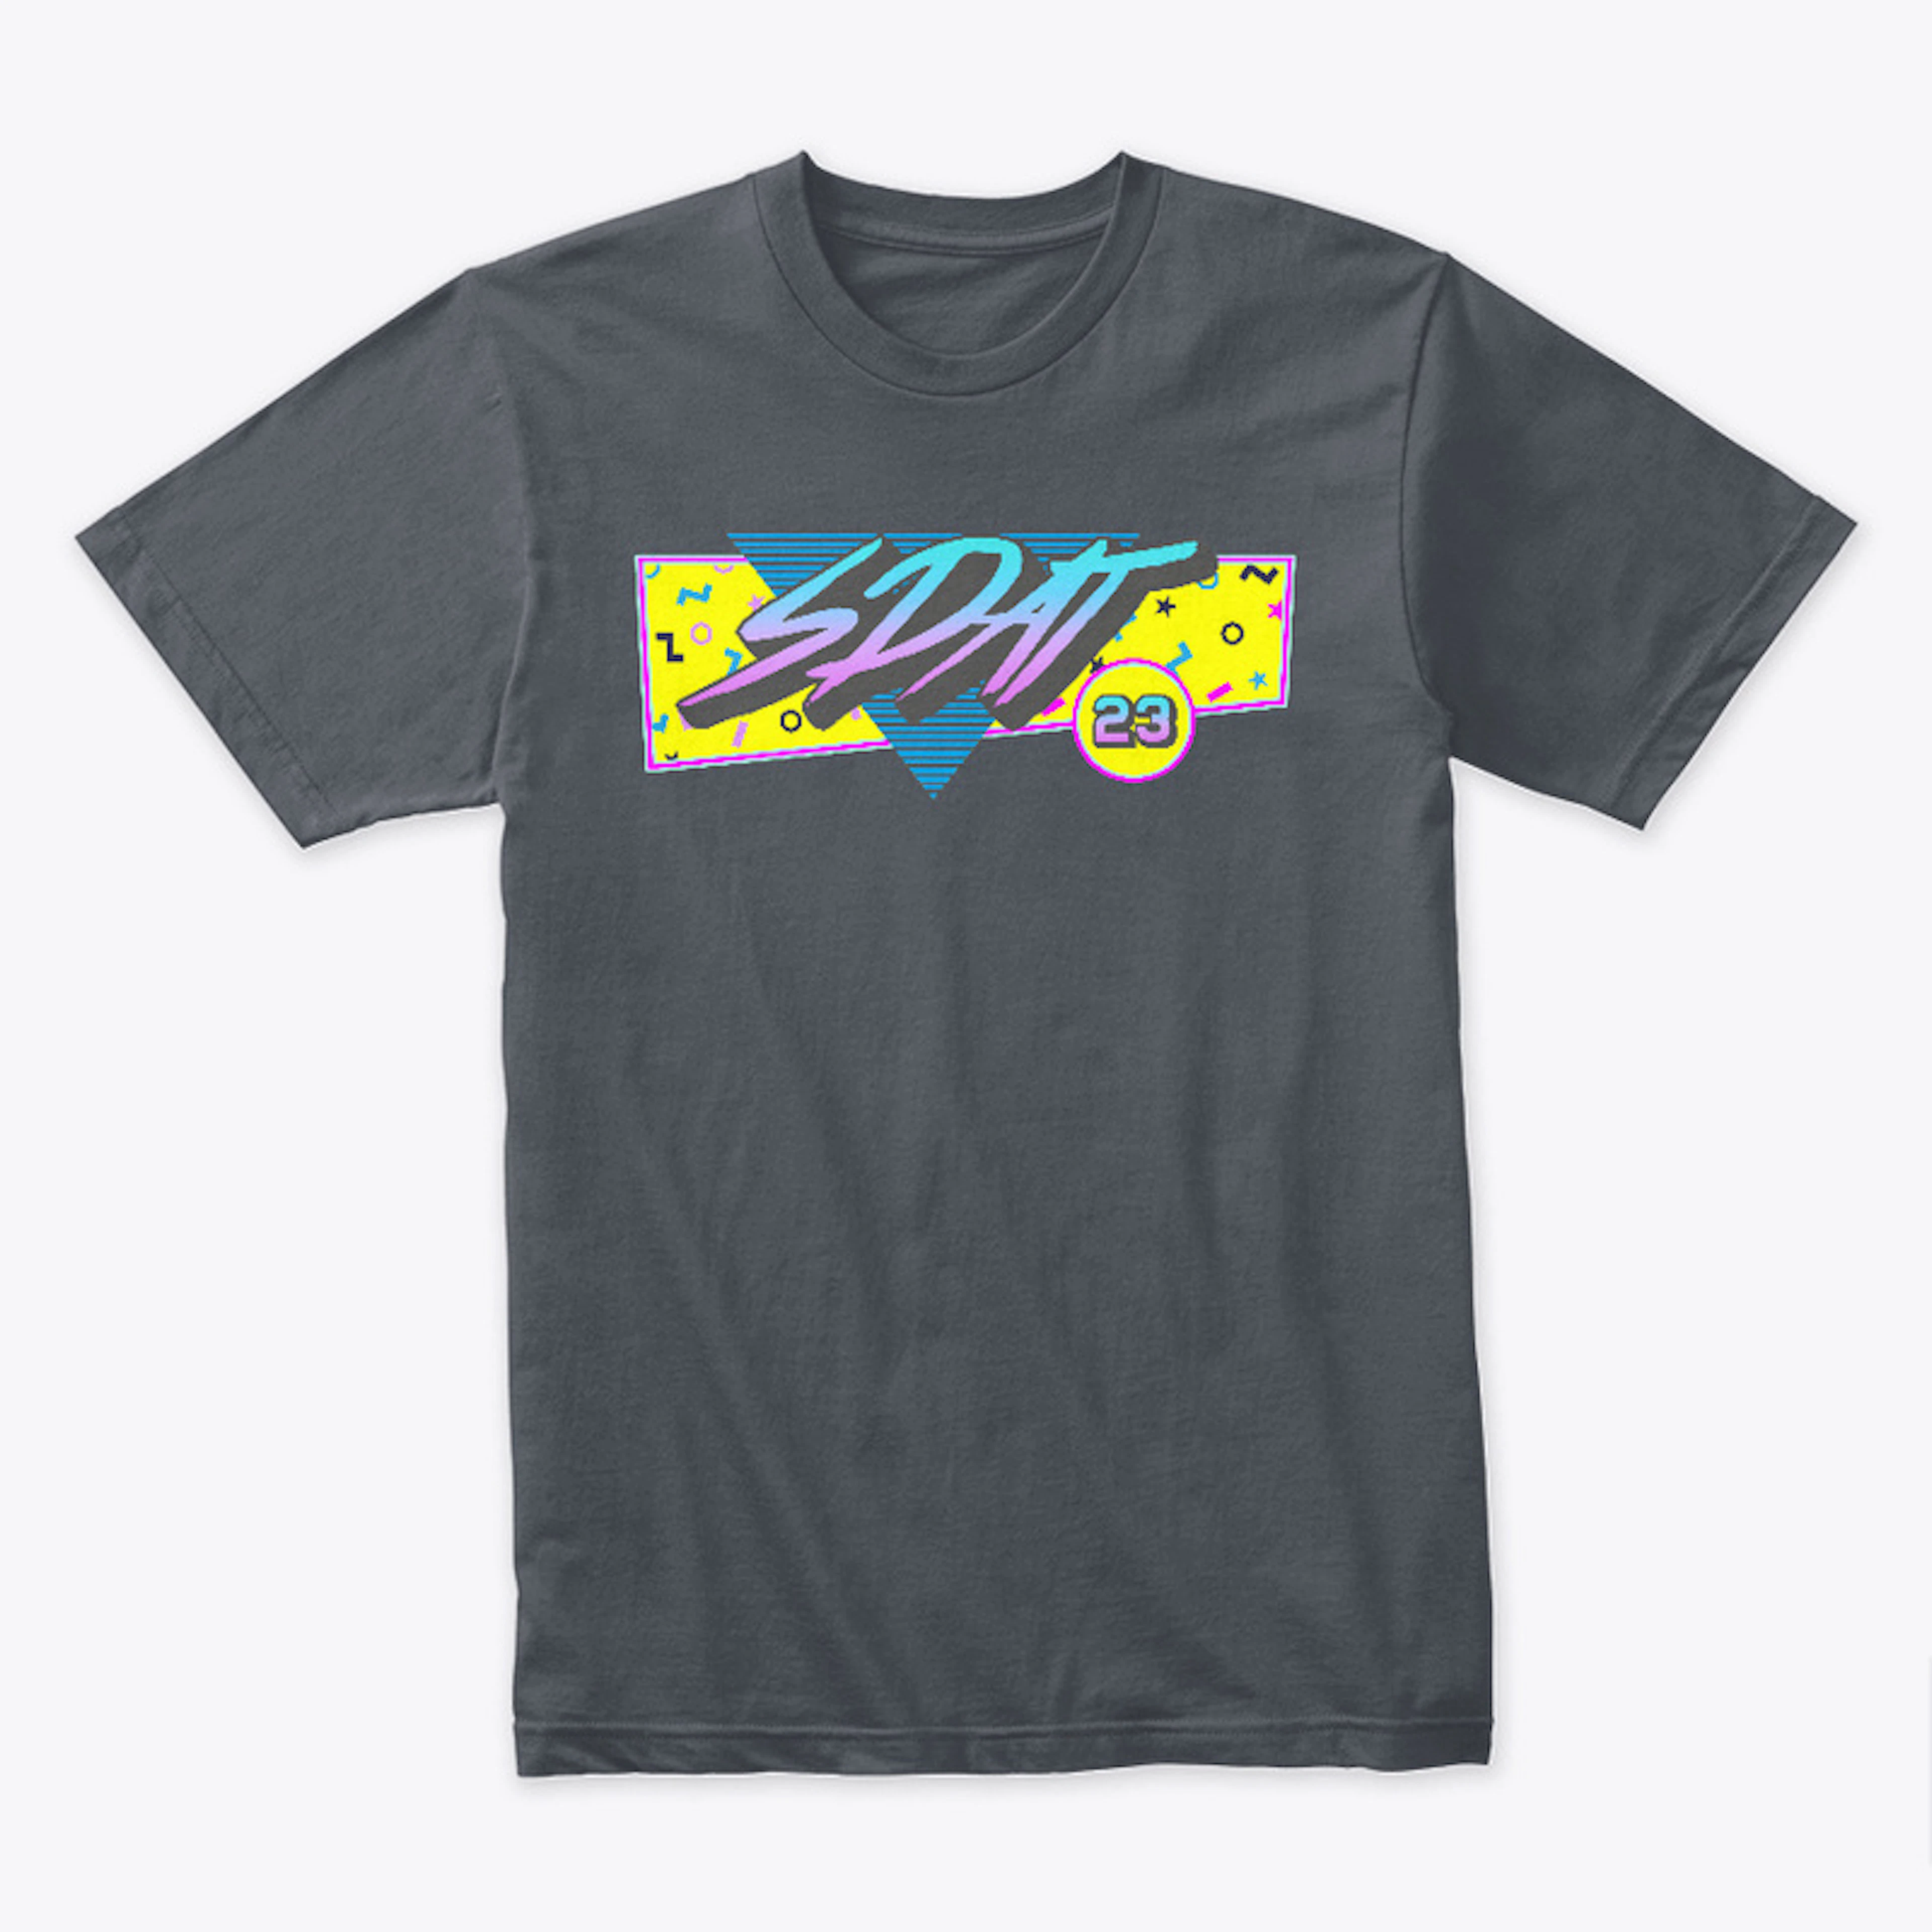 SDAT 2023 "Special Edition" 90s Vibe